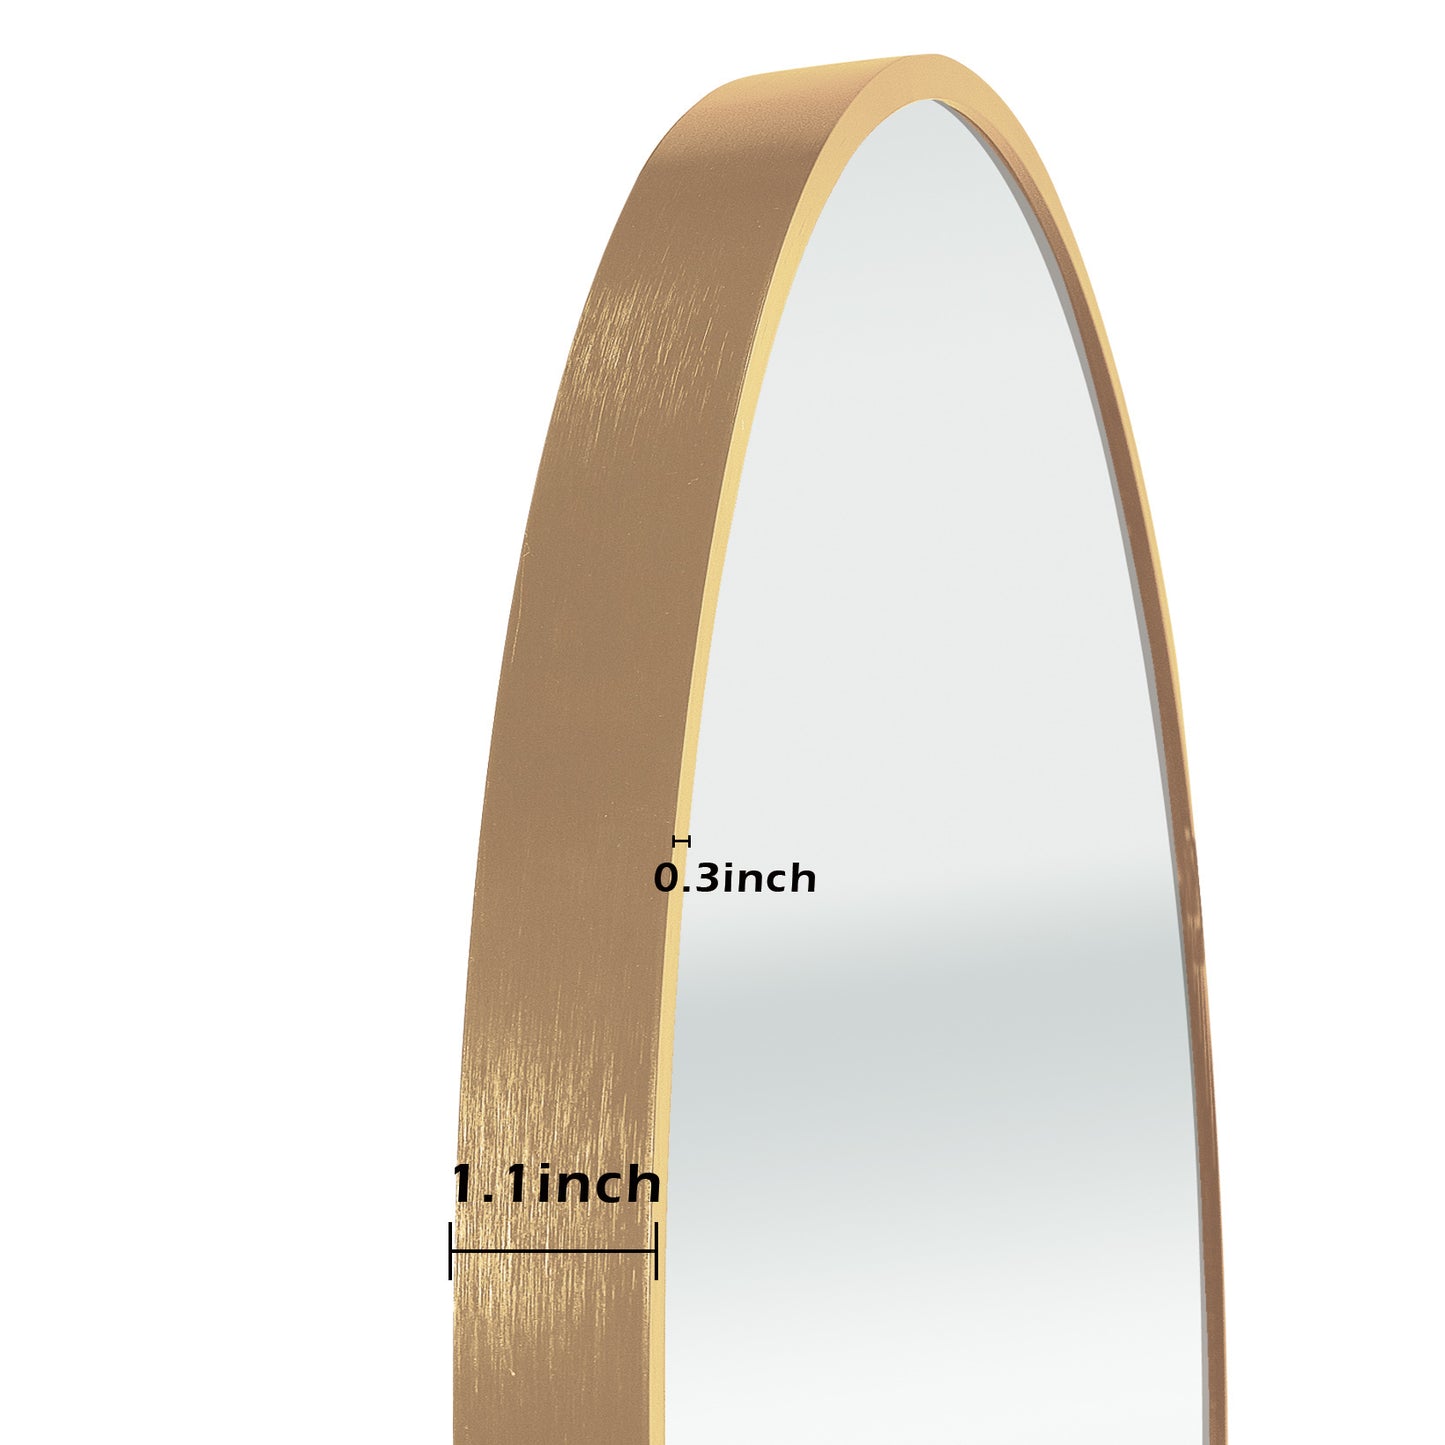 Gold Round Wall Mirror Suitable for Bedroom